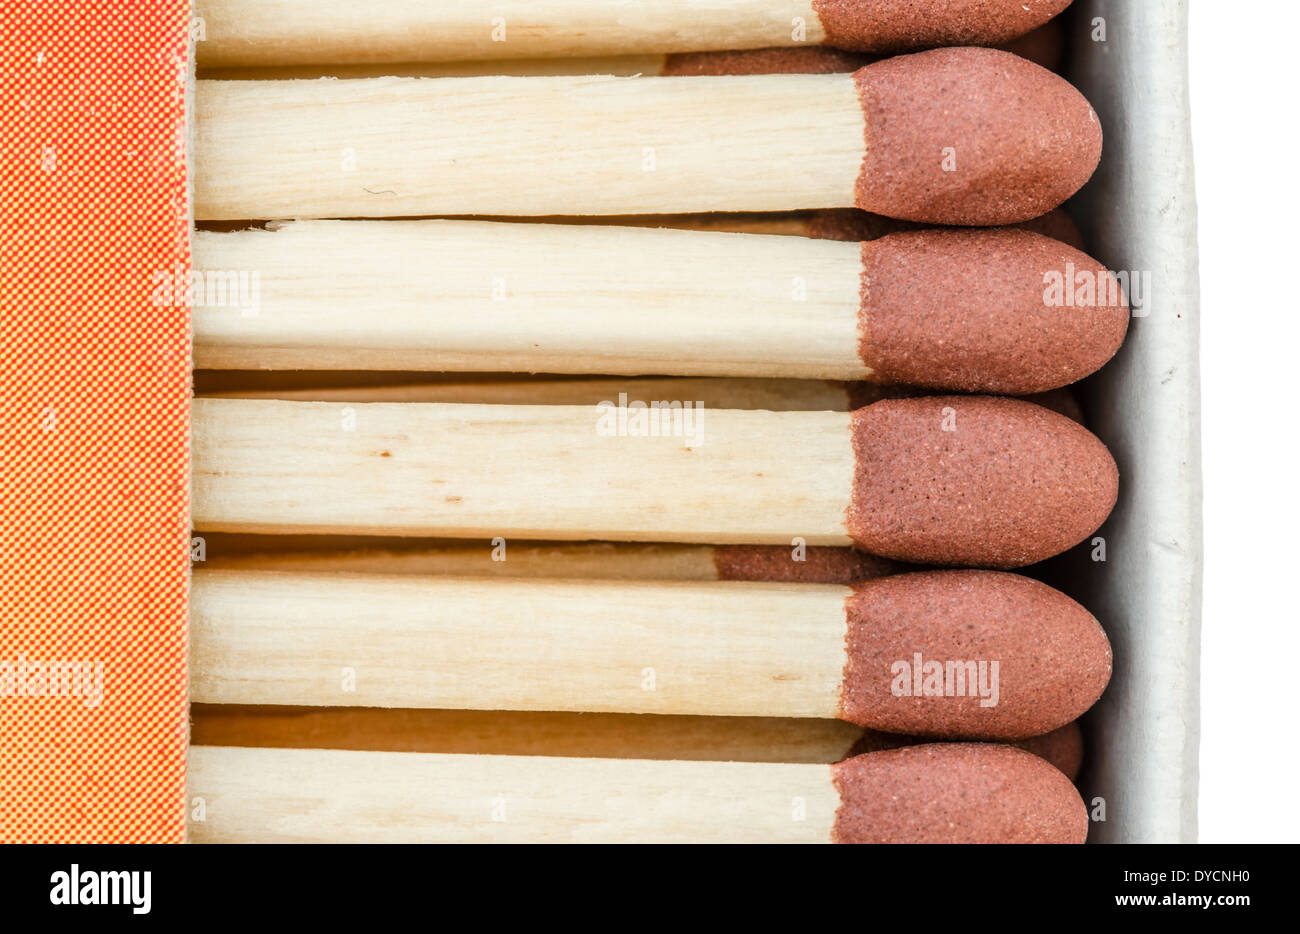 Safety matches. Long safety matches in an open match box. Stock Photo